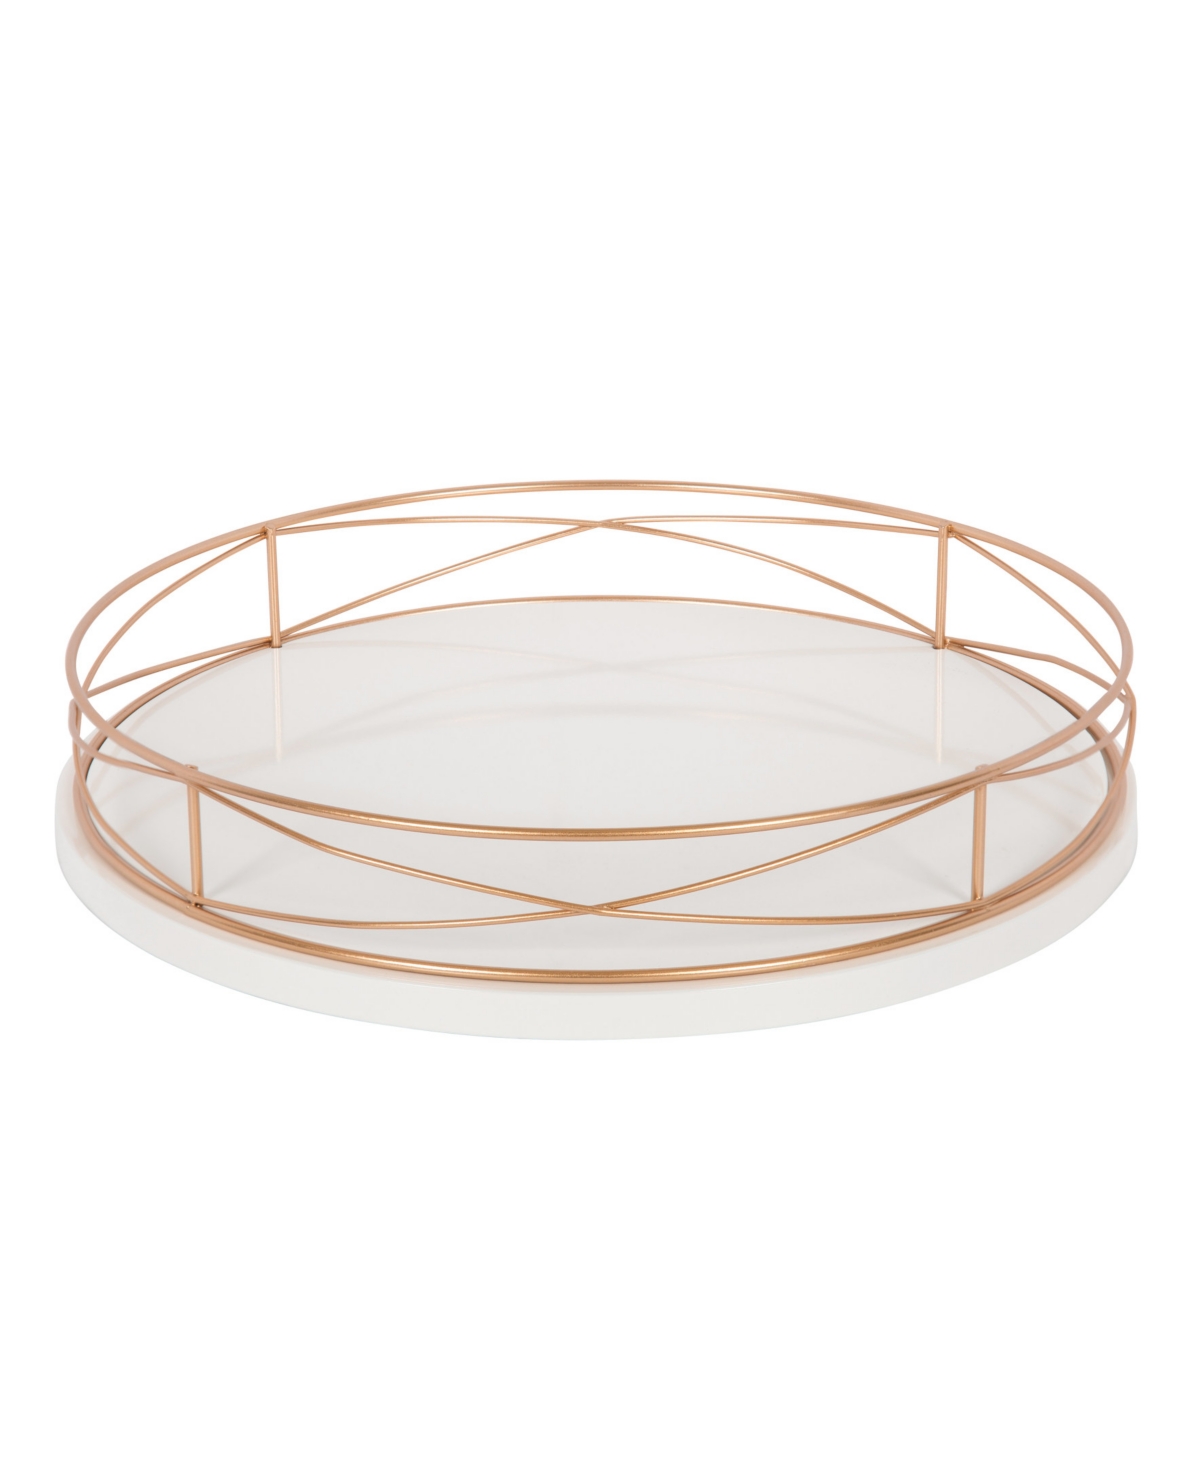 Kate And Laurel Mendel Round Tray With Decorative Metal Rim In White